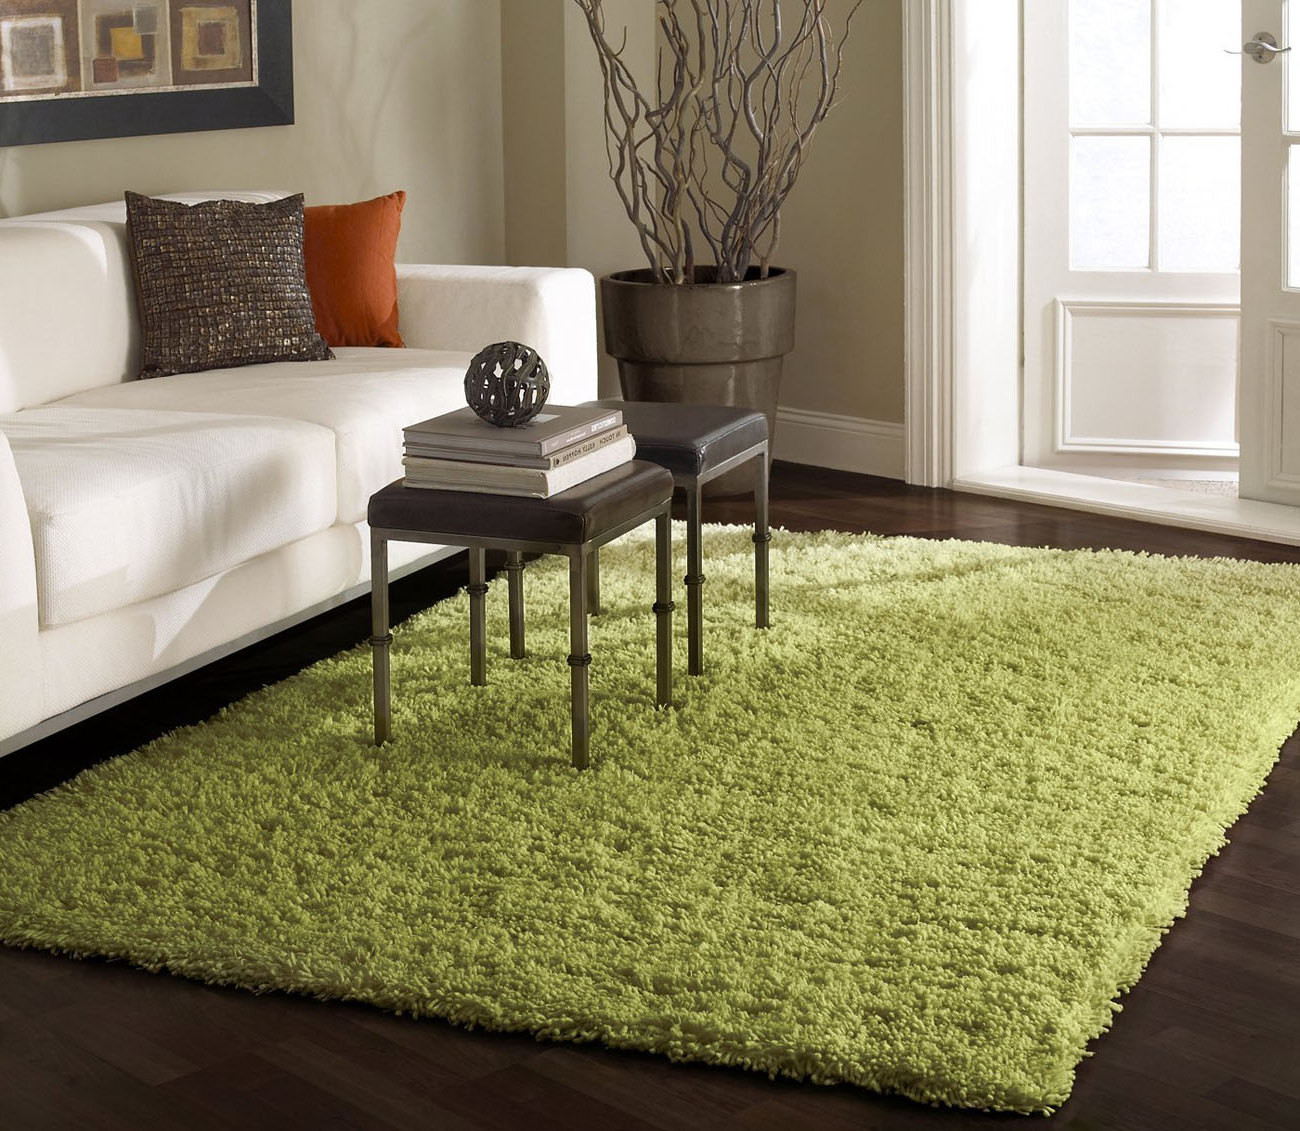 Rugs For Living Room Cheap
 12 the Best Ideas for Living Room Rugs Green – Floor